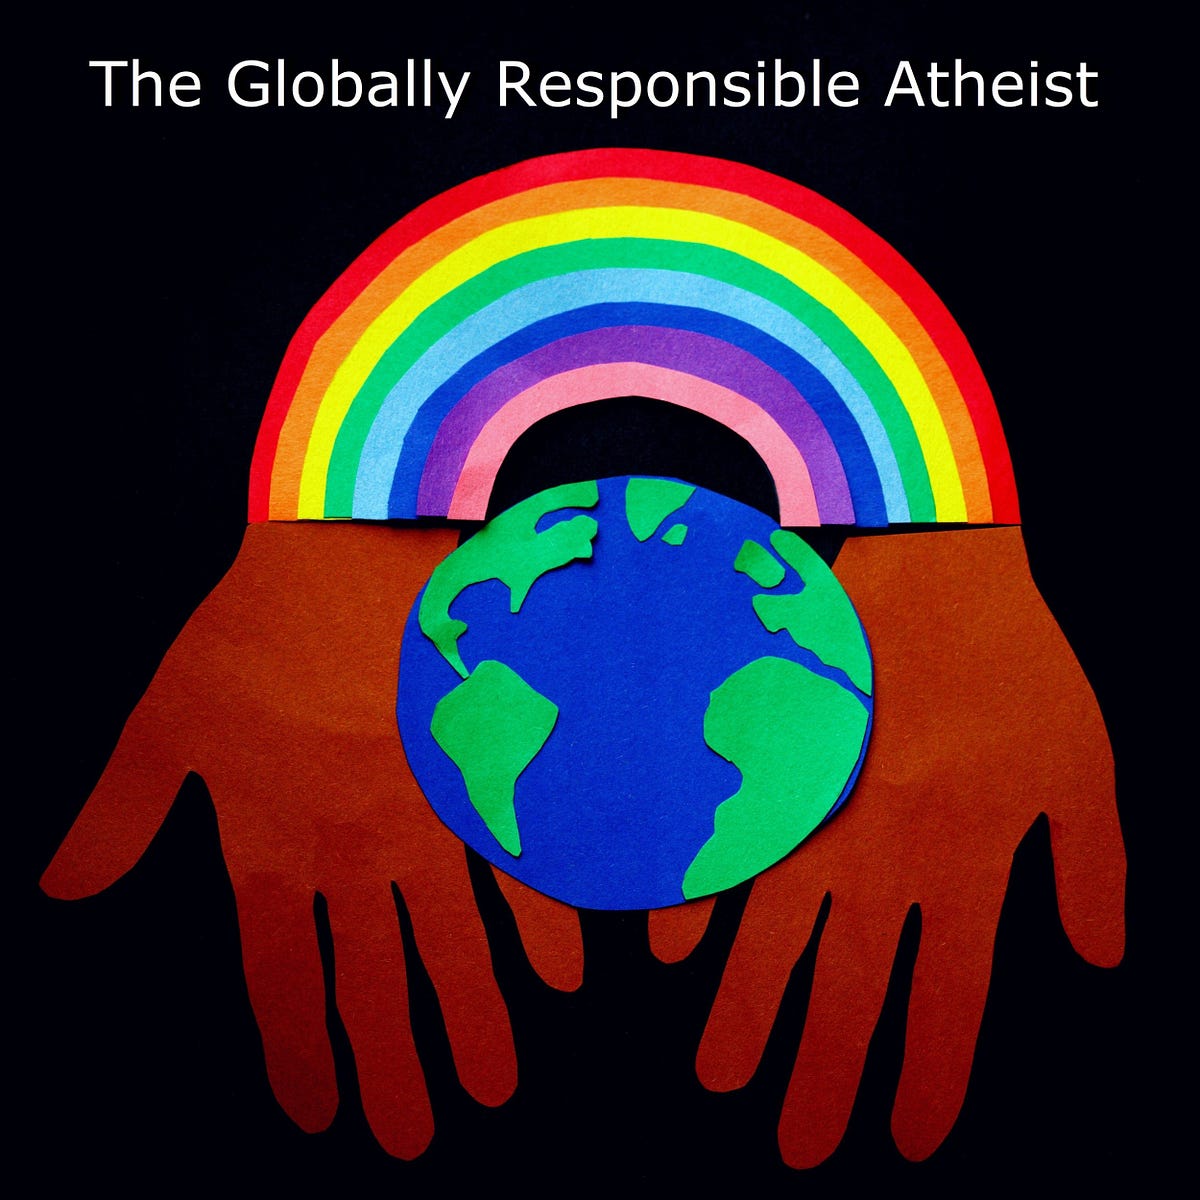 How Many IQ Points Higher Are Atheists Over Religious People?, by Tony  Berard, The Globally Responsible Atheist